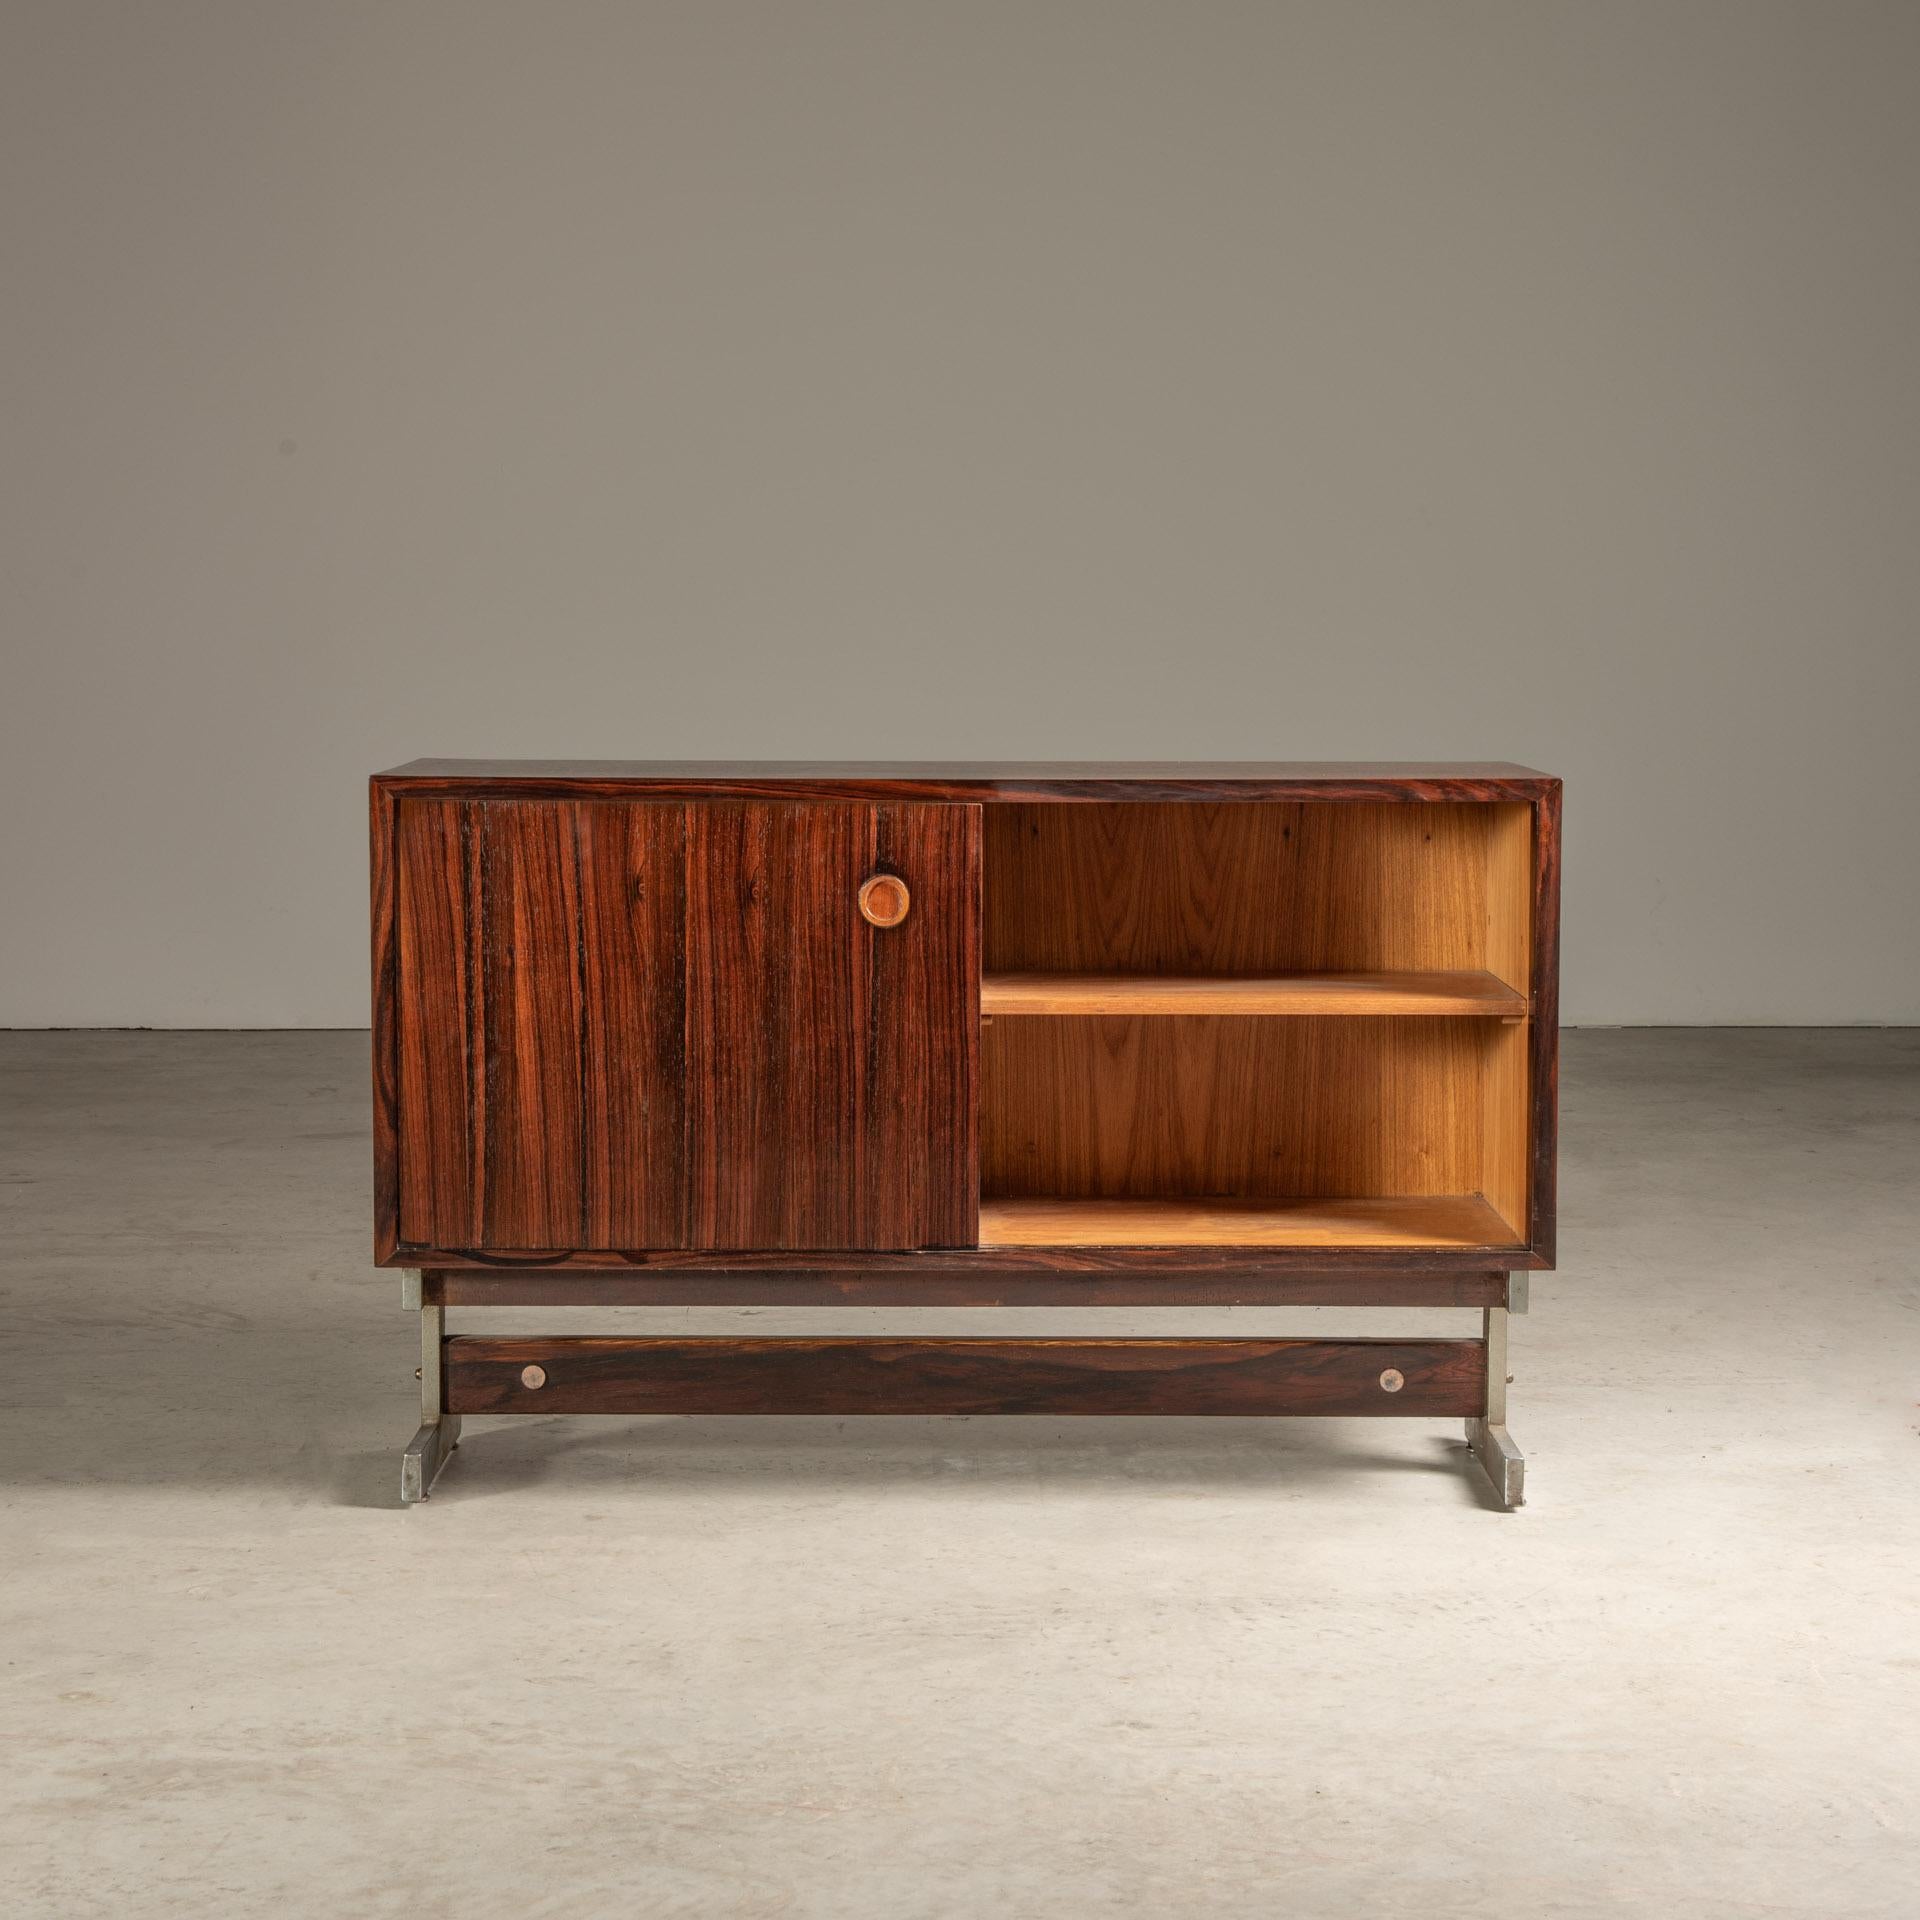 Steel Small Sideboard in Hardwood, by Sergio Rodrigues, Brazilian Mid-Century Modern For Sale